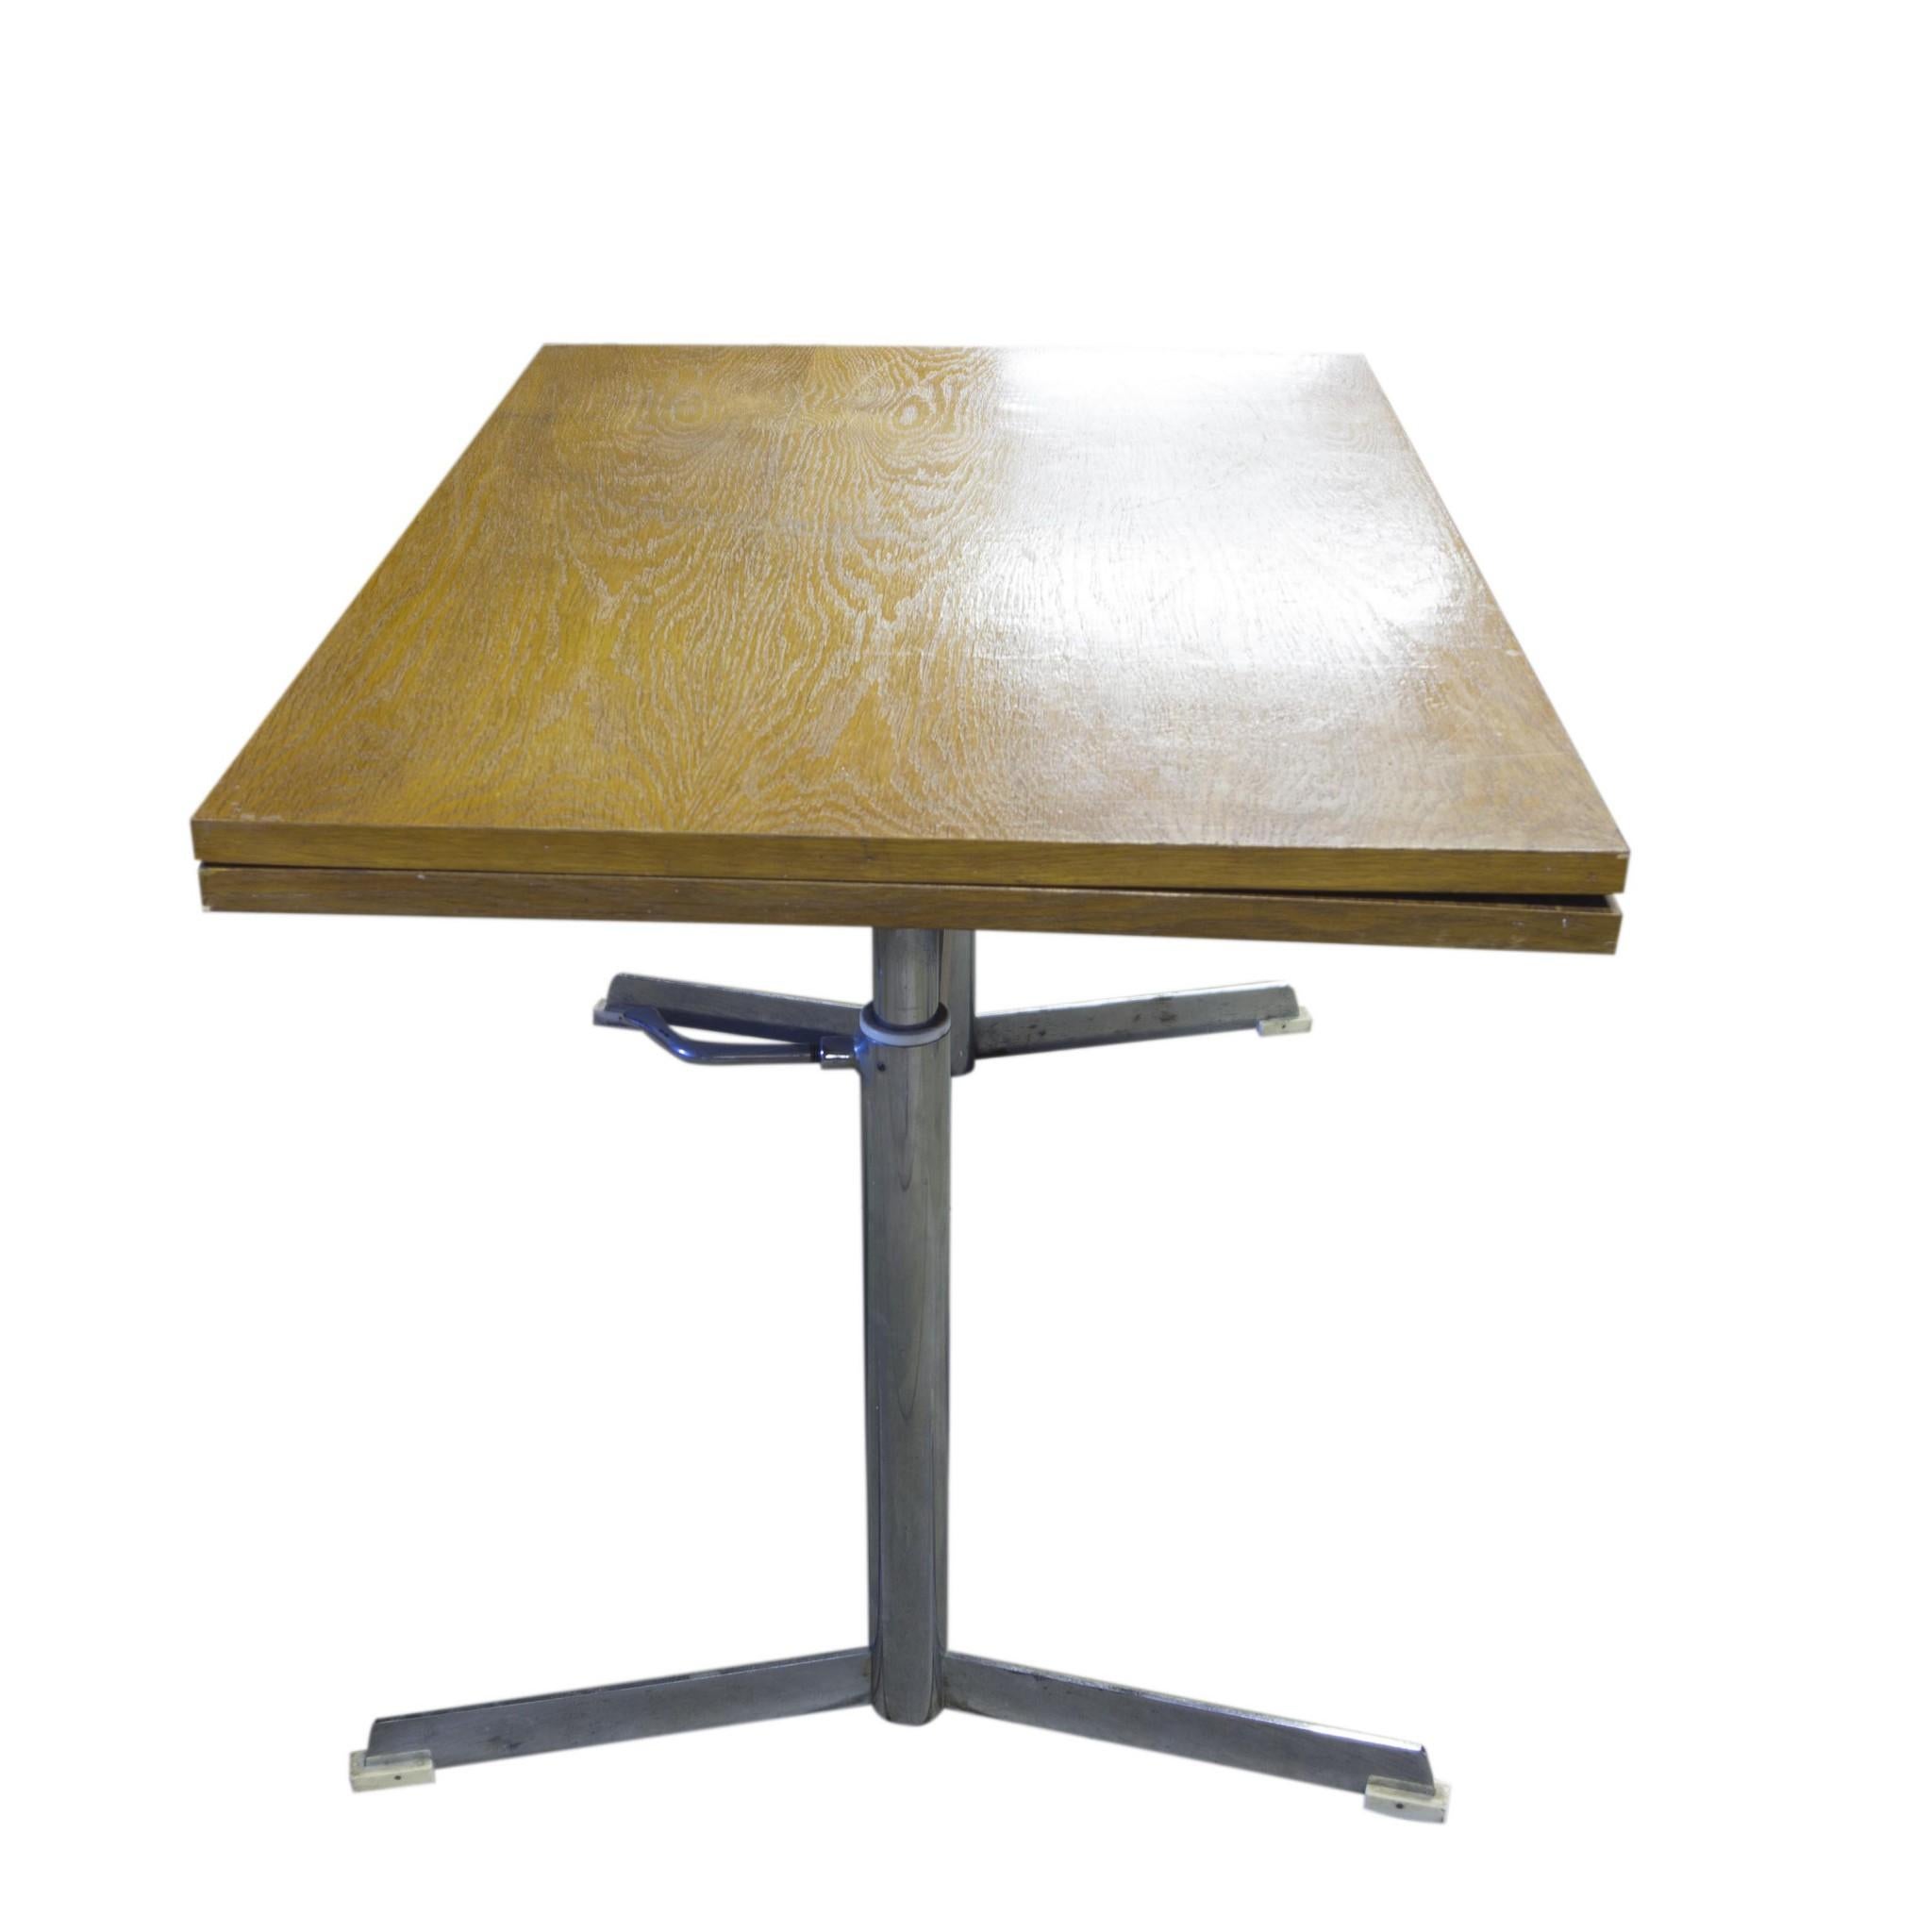 Vintage folding dining table, 1960s, chrome metal base, Middle Europe. Beechwood. Traces of wear and tear commensurate with age, it can show some signs of age through scuffs, faded finishes or small visible repairs. Overall in good vintage